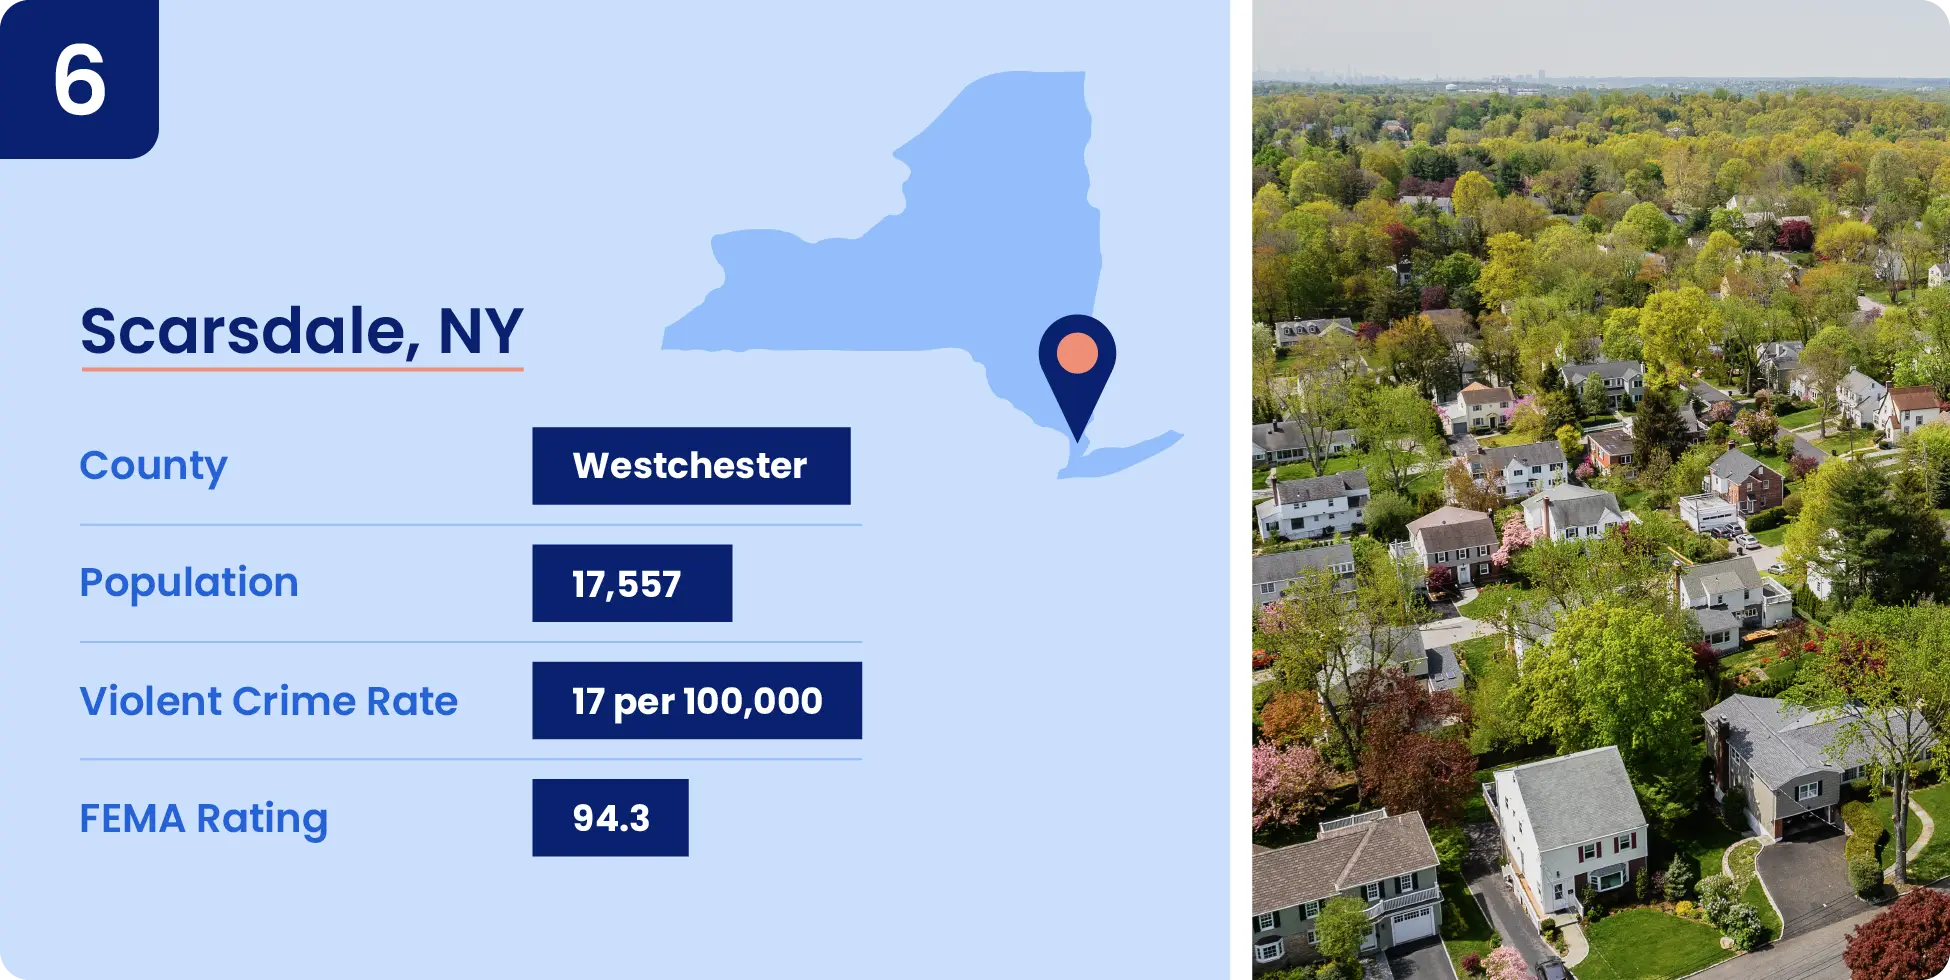 Image shows key data about one of the safest cities in New York, Scarsdale.